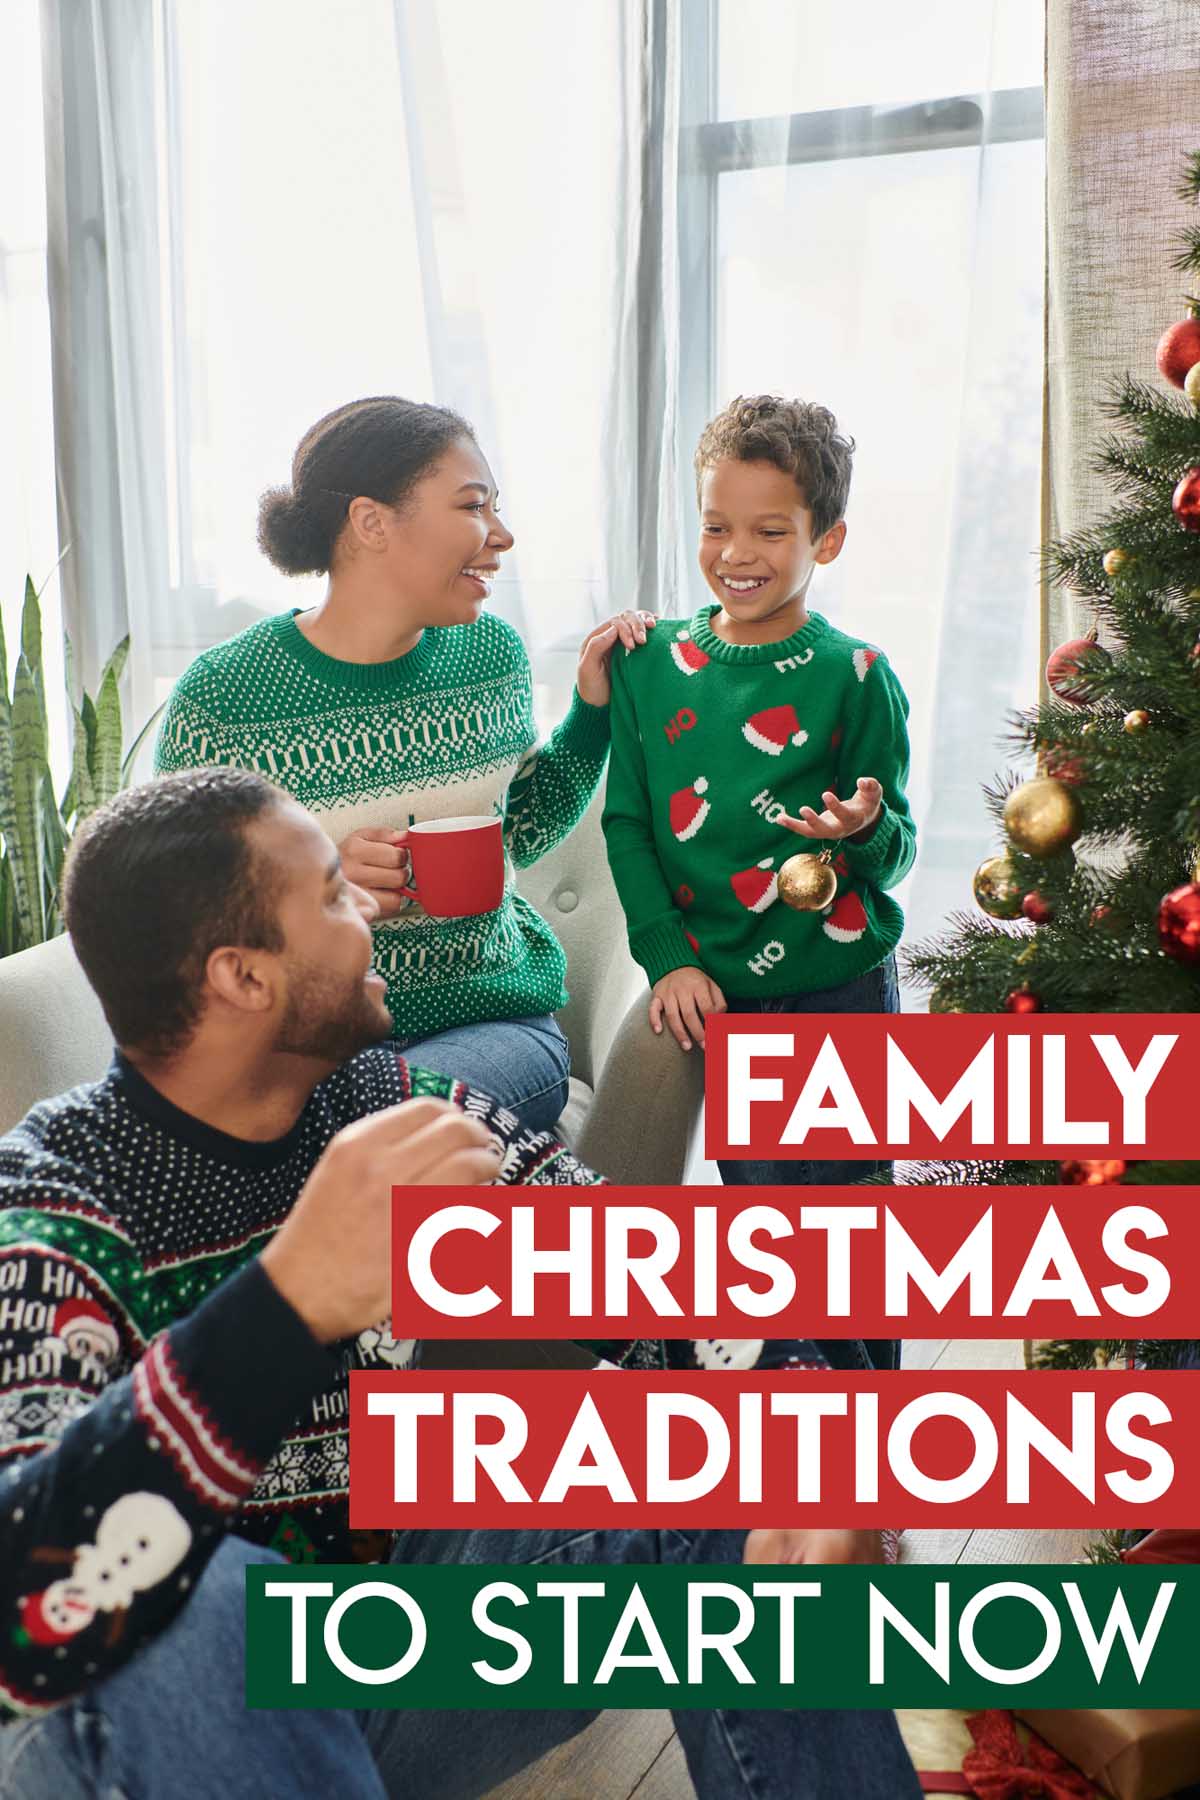 How to Start Your Own Family Christmas Traditions + 14 Christmas Tradition Ideas via @lara_neves